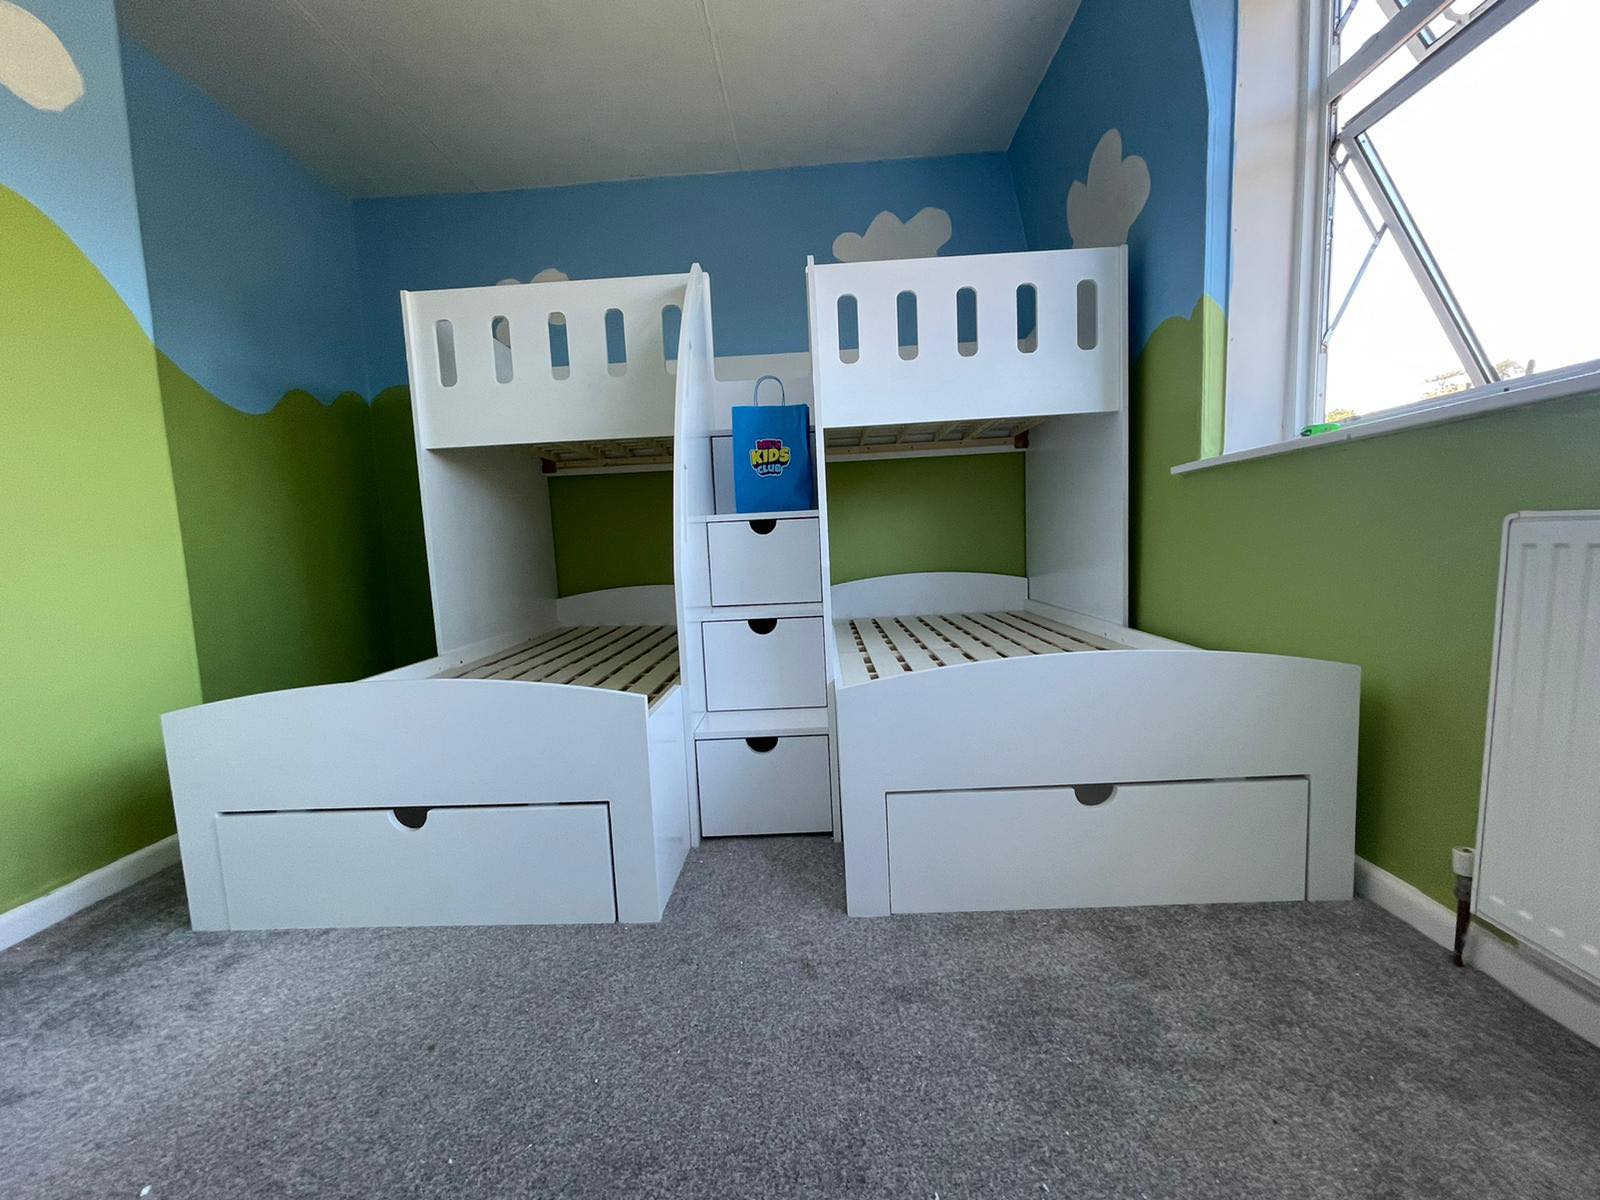 bunk bed with steps